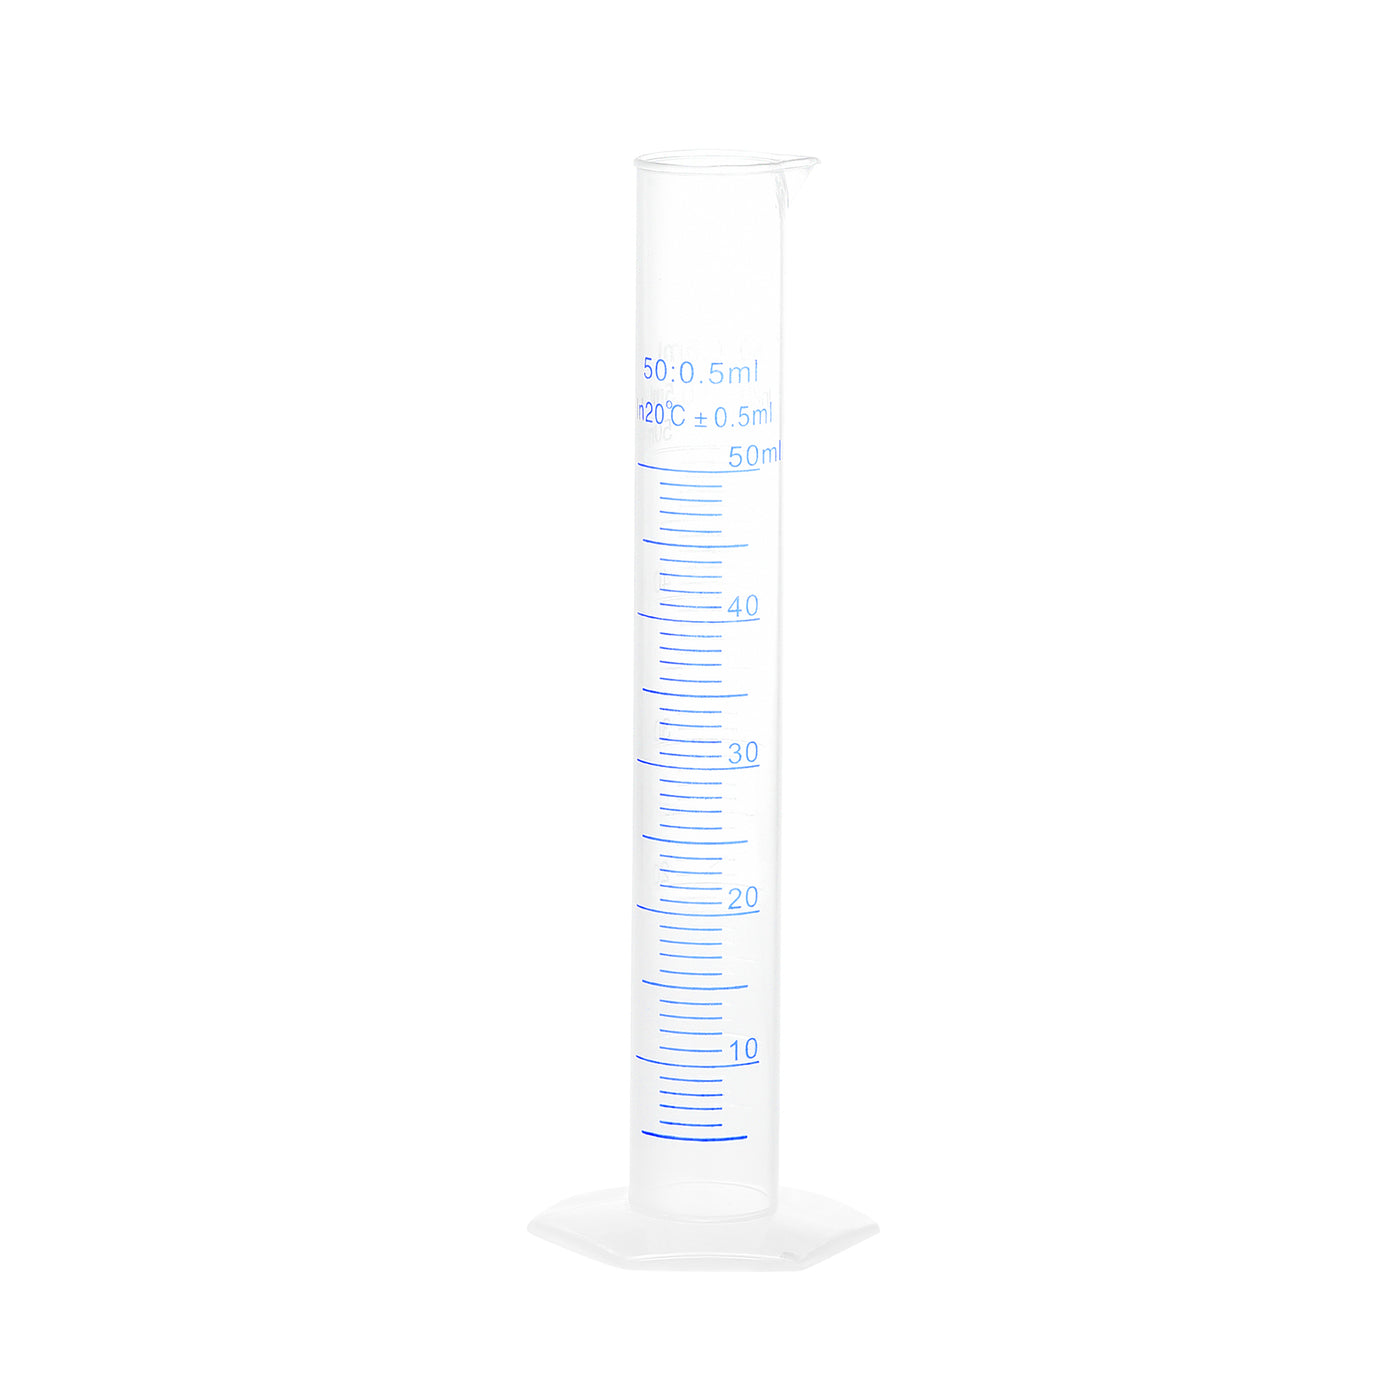 uxcell Uxcell Plastic Graduated Cylinder, 50ml Measuring Cylinder, 2-Sided Metric Marking